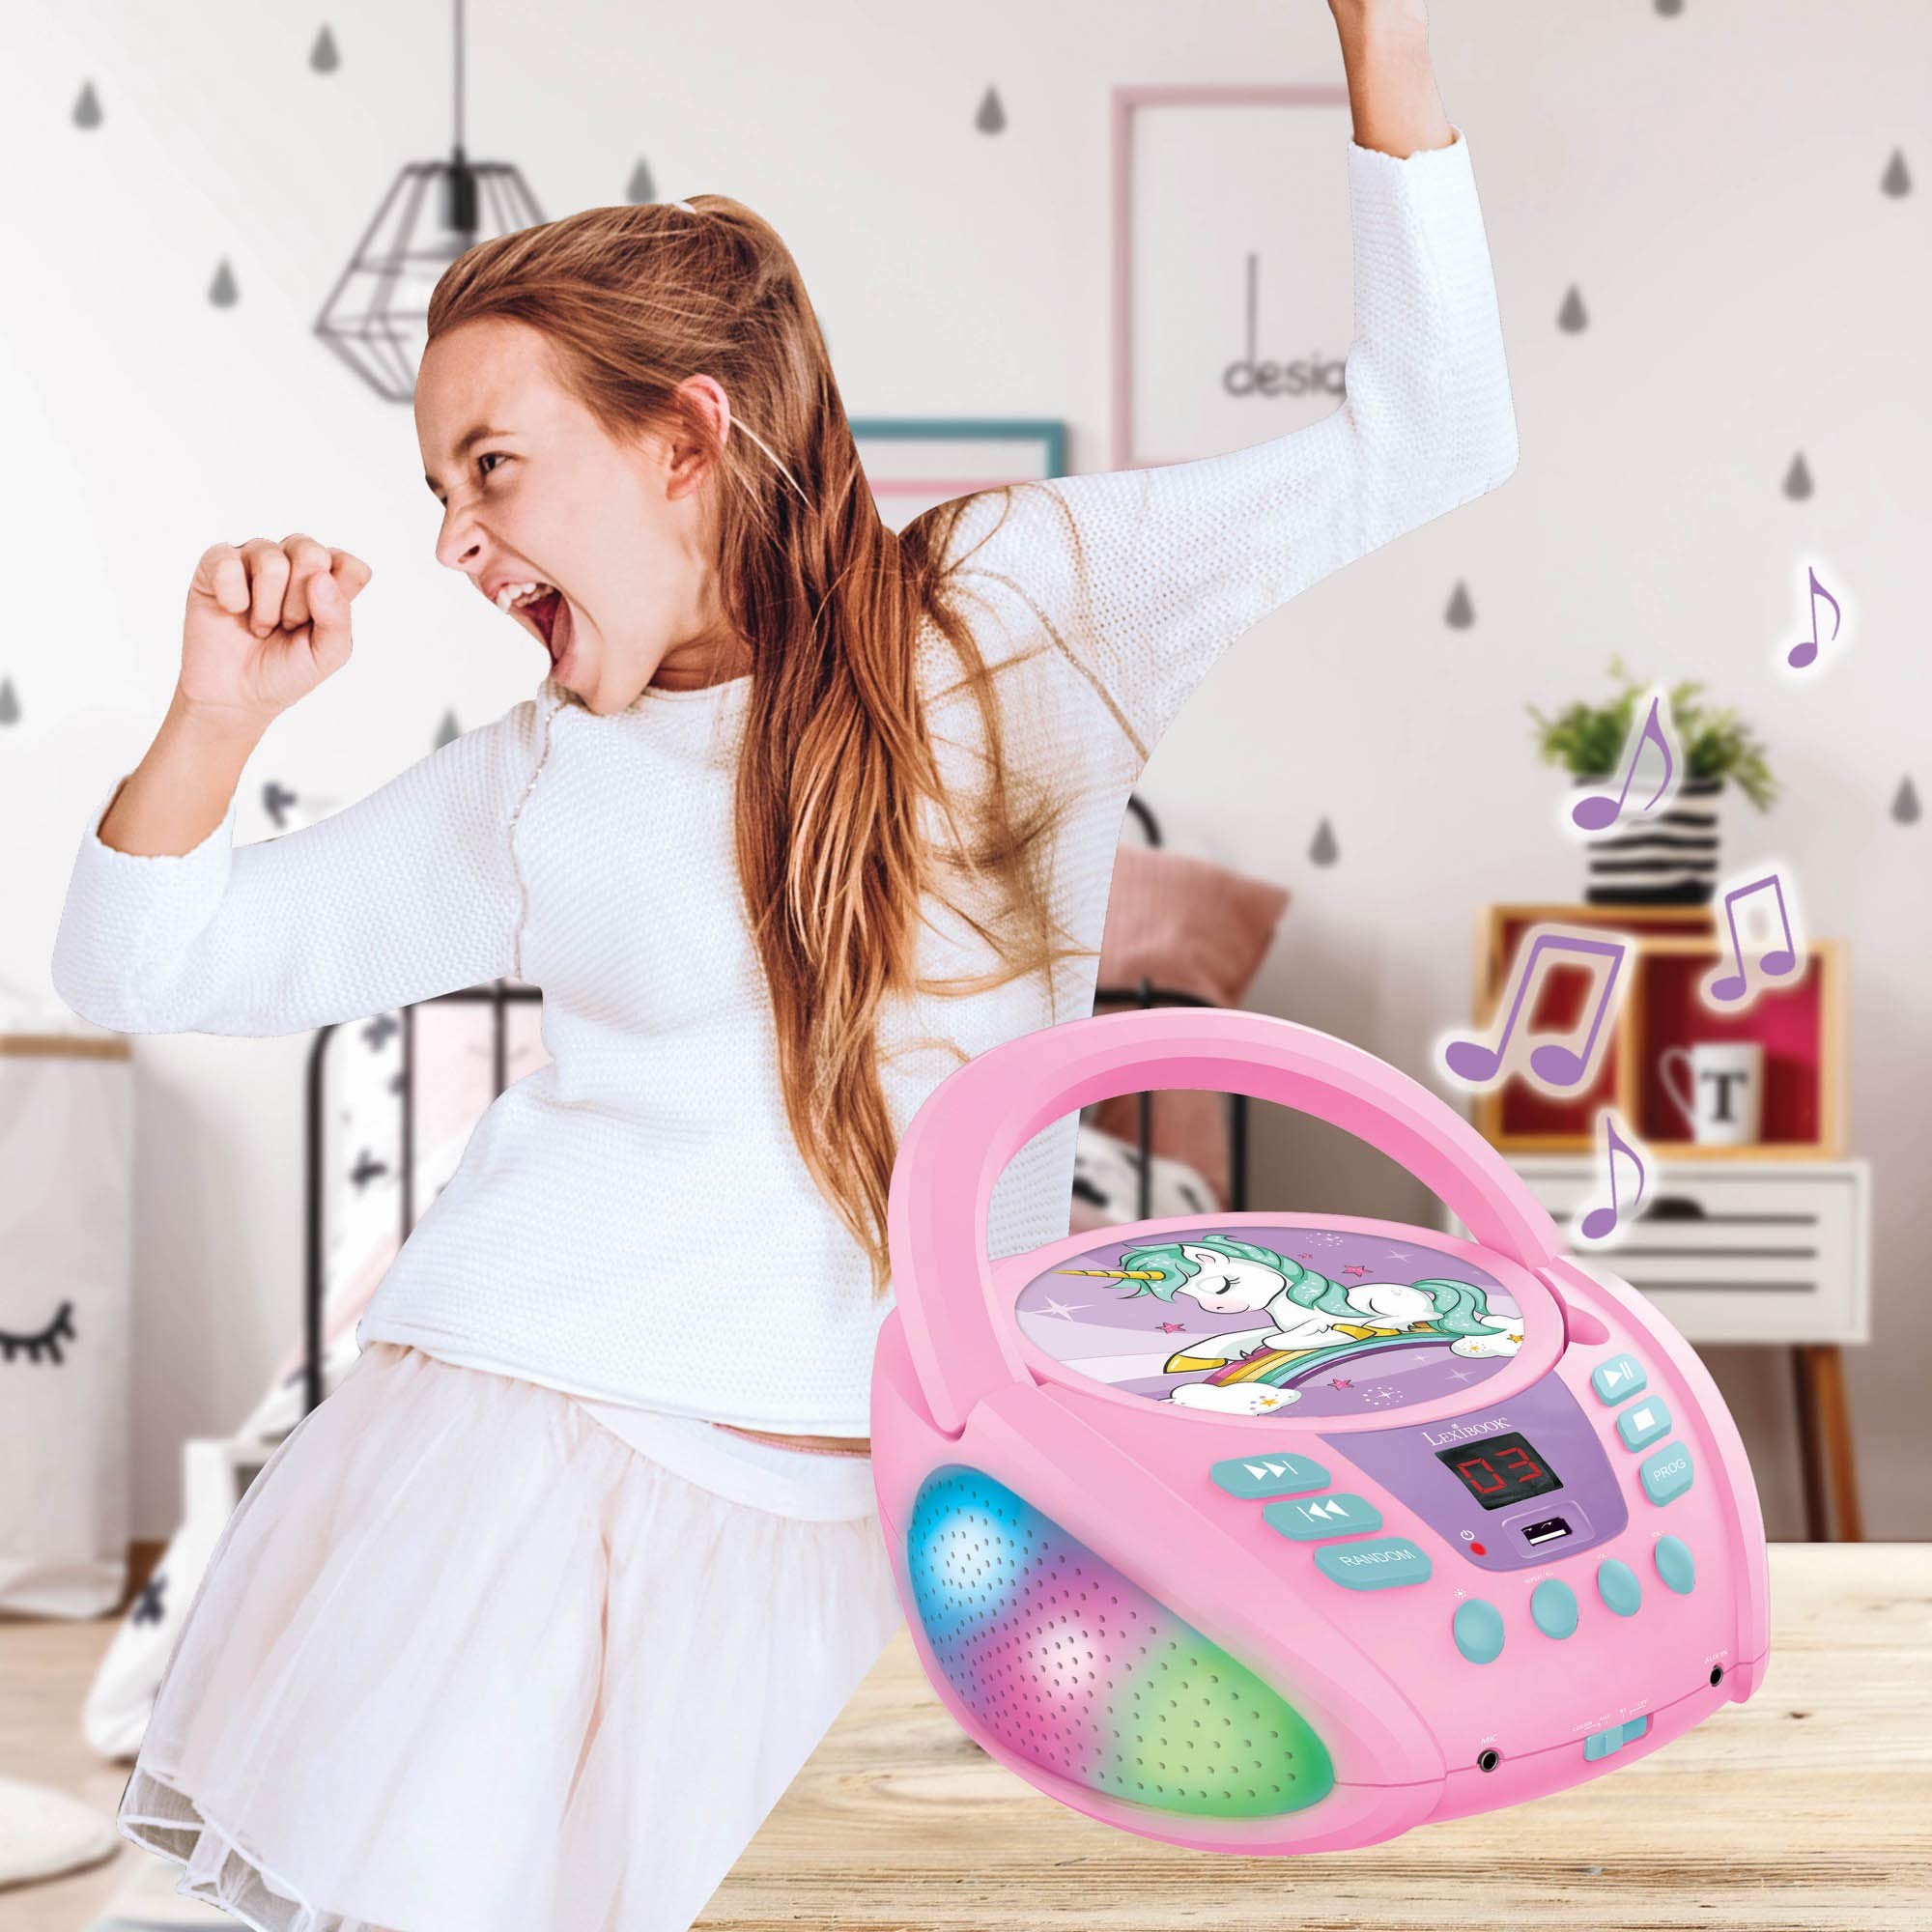 Lexibook Unicorn - Bluetooth CD Player for Kids – Portable, Multicoloured Light Effects, Microphone Jack, Aux-in Jack, AC or Battery-Operated, Girls, Boys, Pink, RCD109UNI